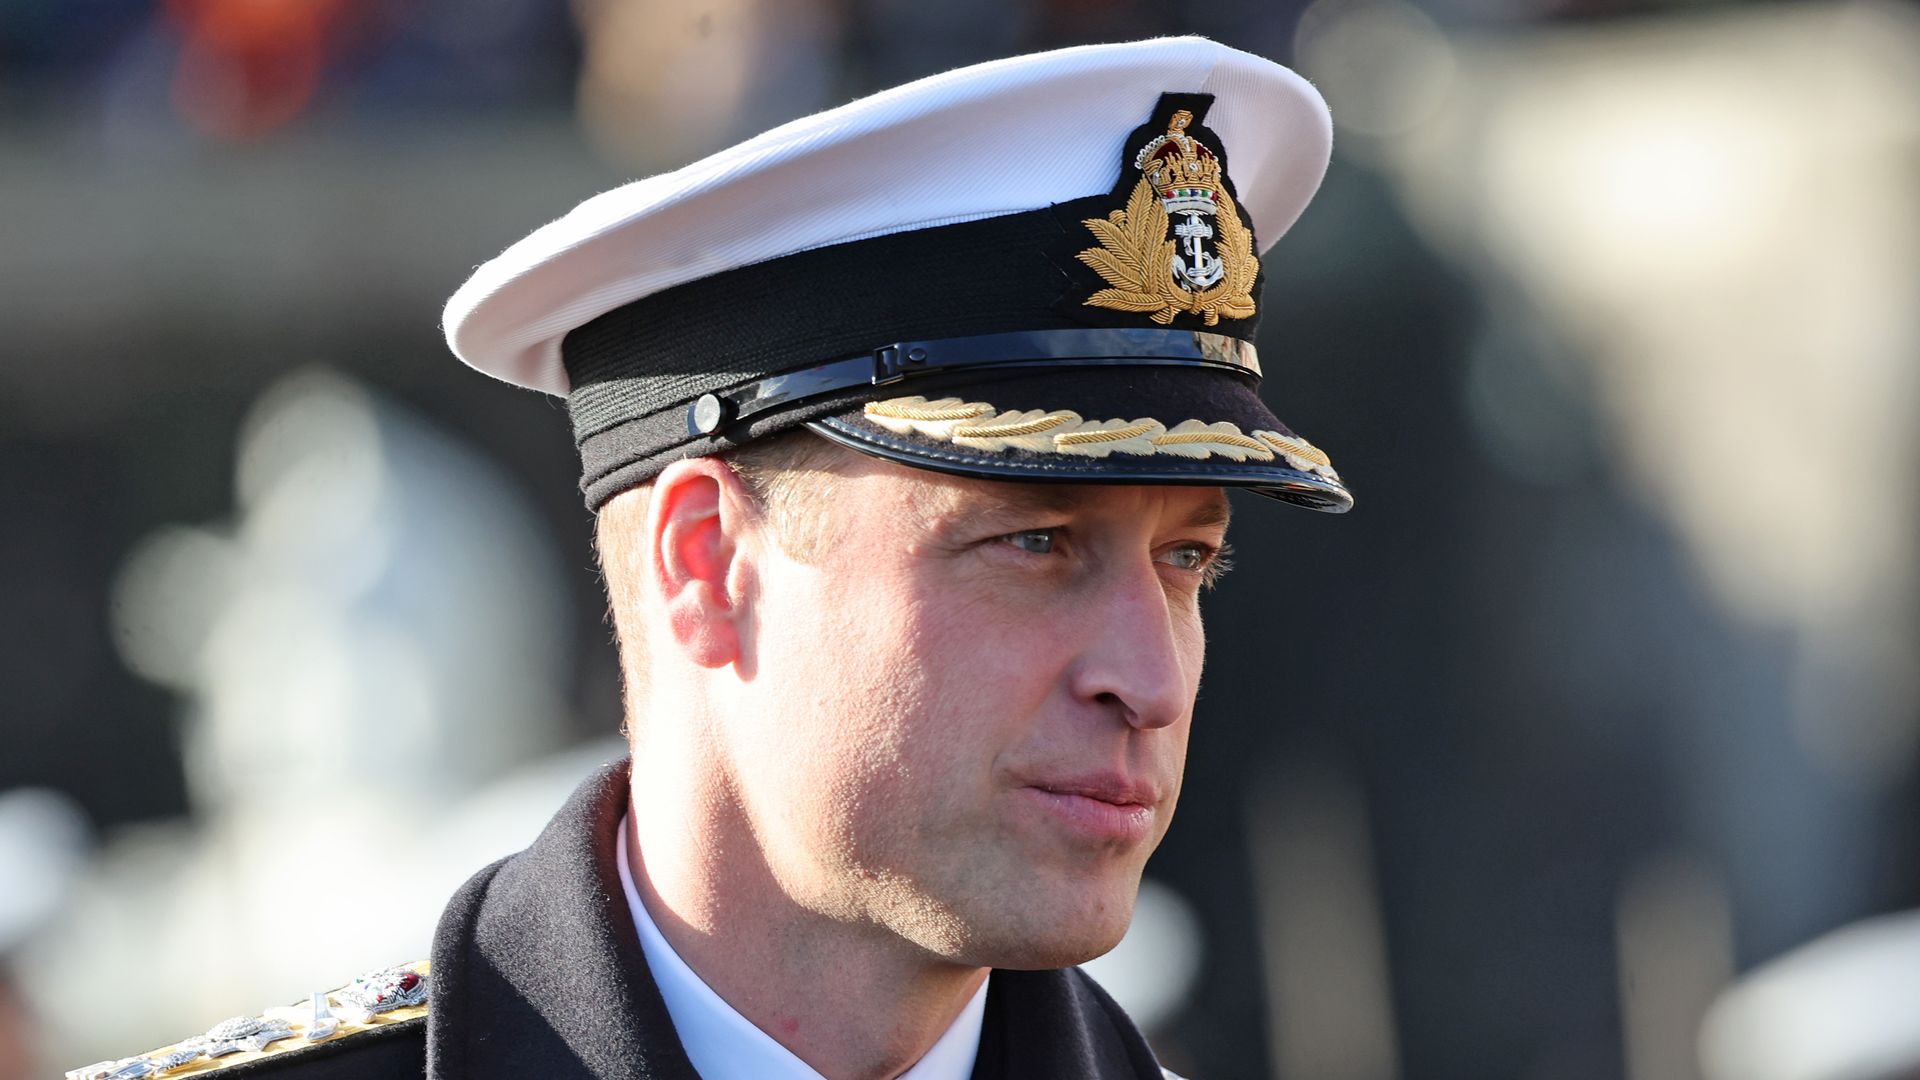 A photo of Prince William in uniform